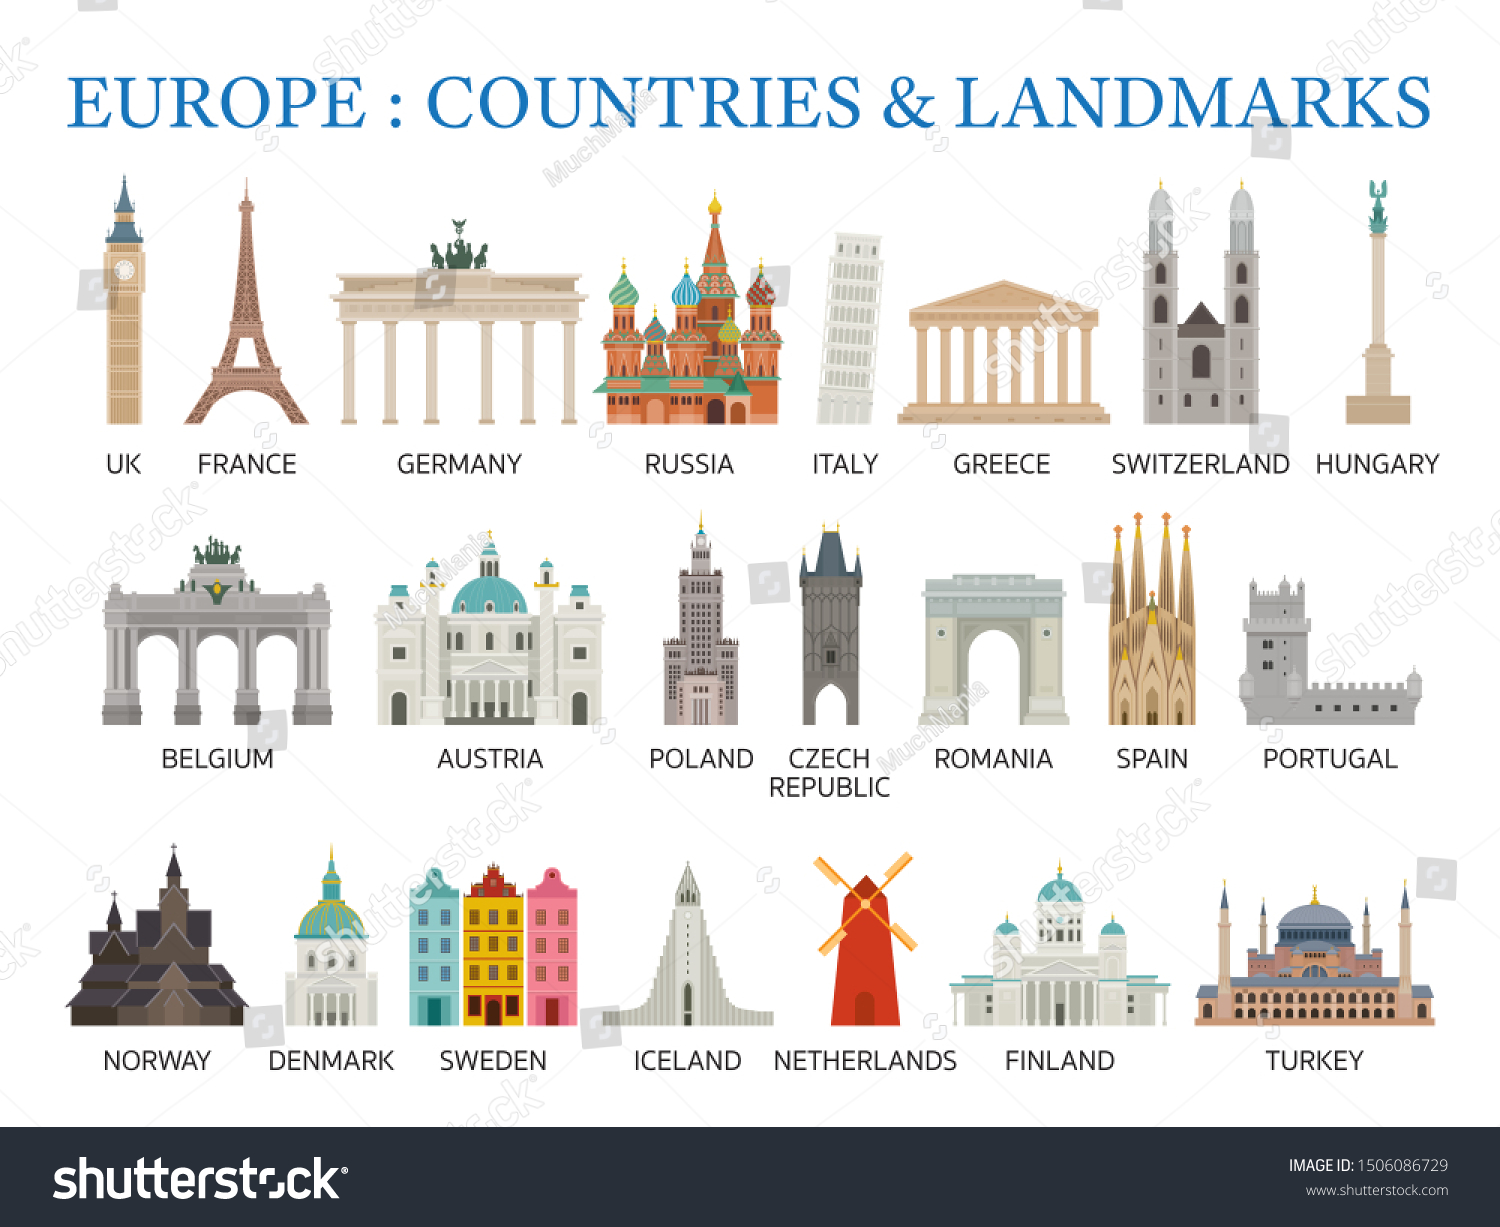 Europe Countries Landmarks in Flat Style, Famous Place and Historical Buildings, Travel and Tourist Attraction